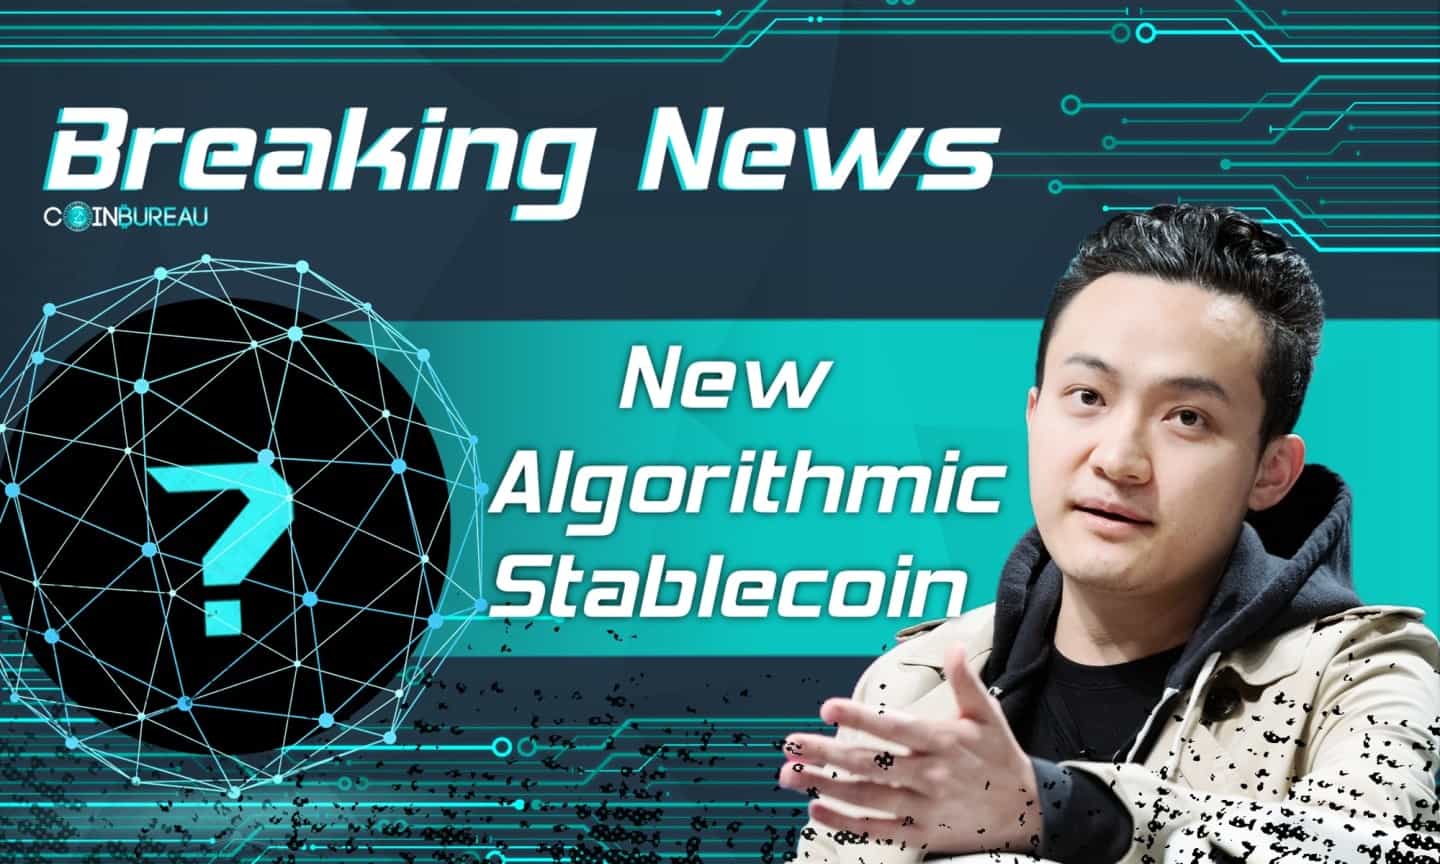 tron founder justin sun reveals plans for new algorithmic stablecoin backed by trx